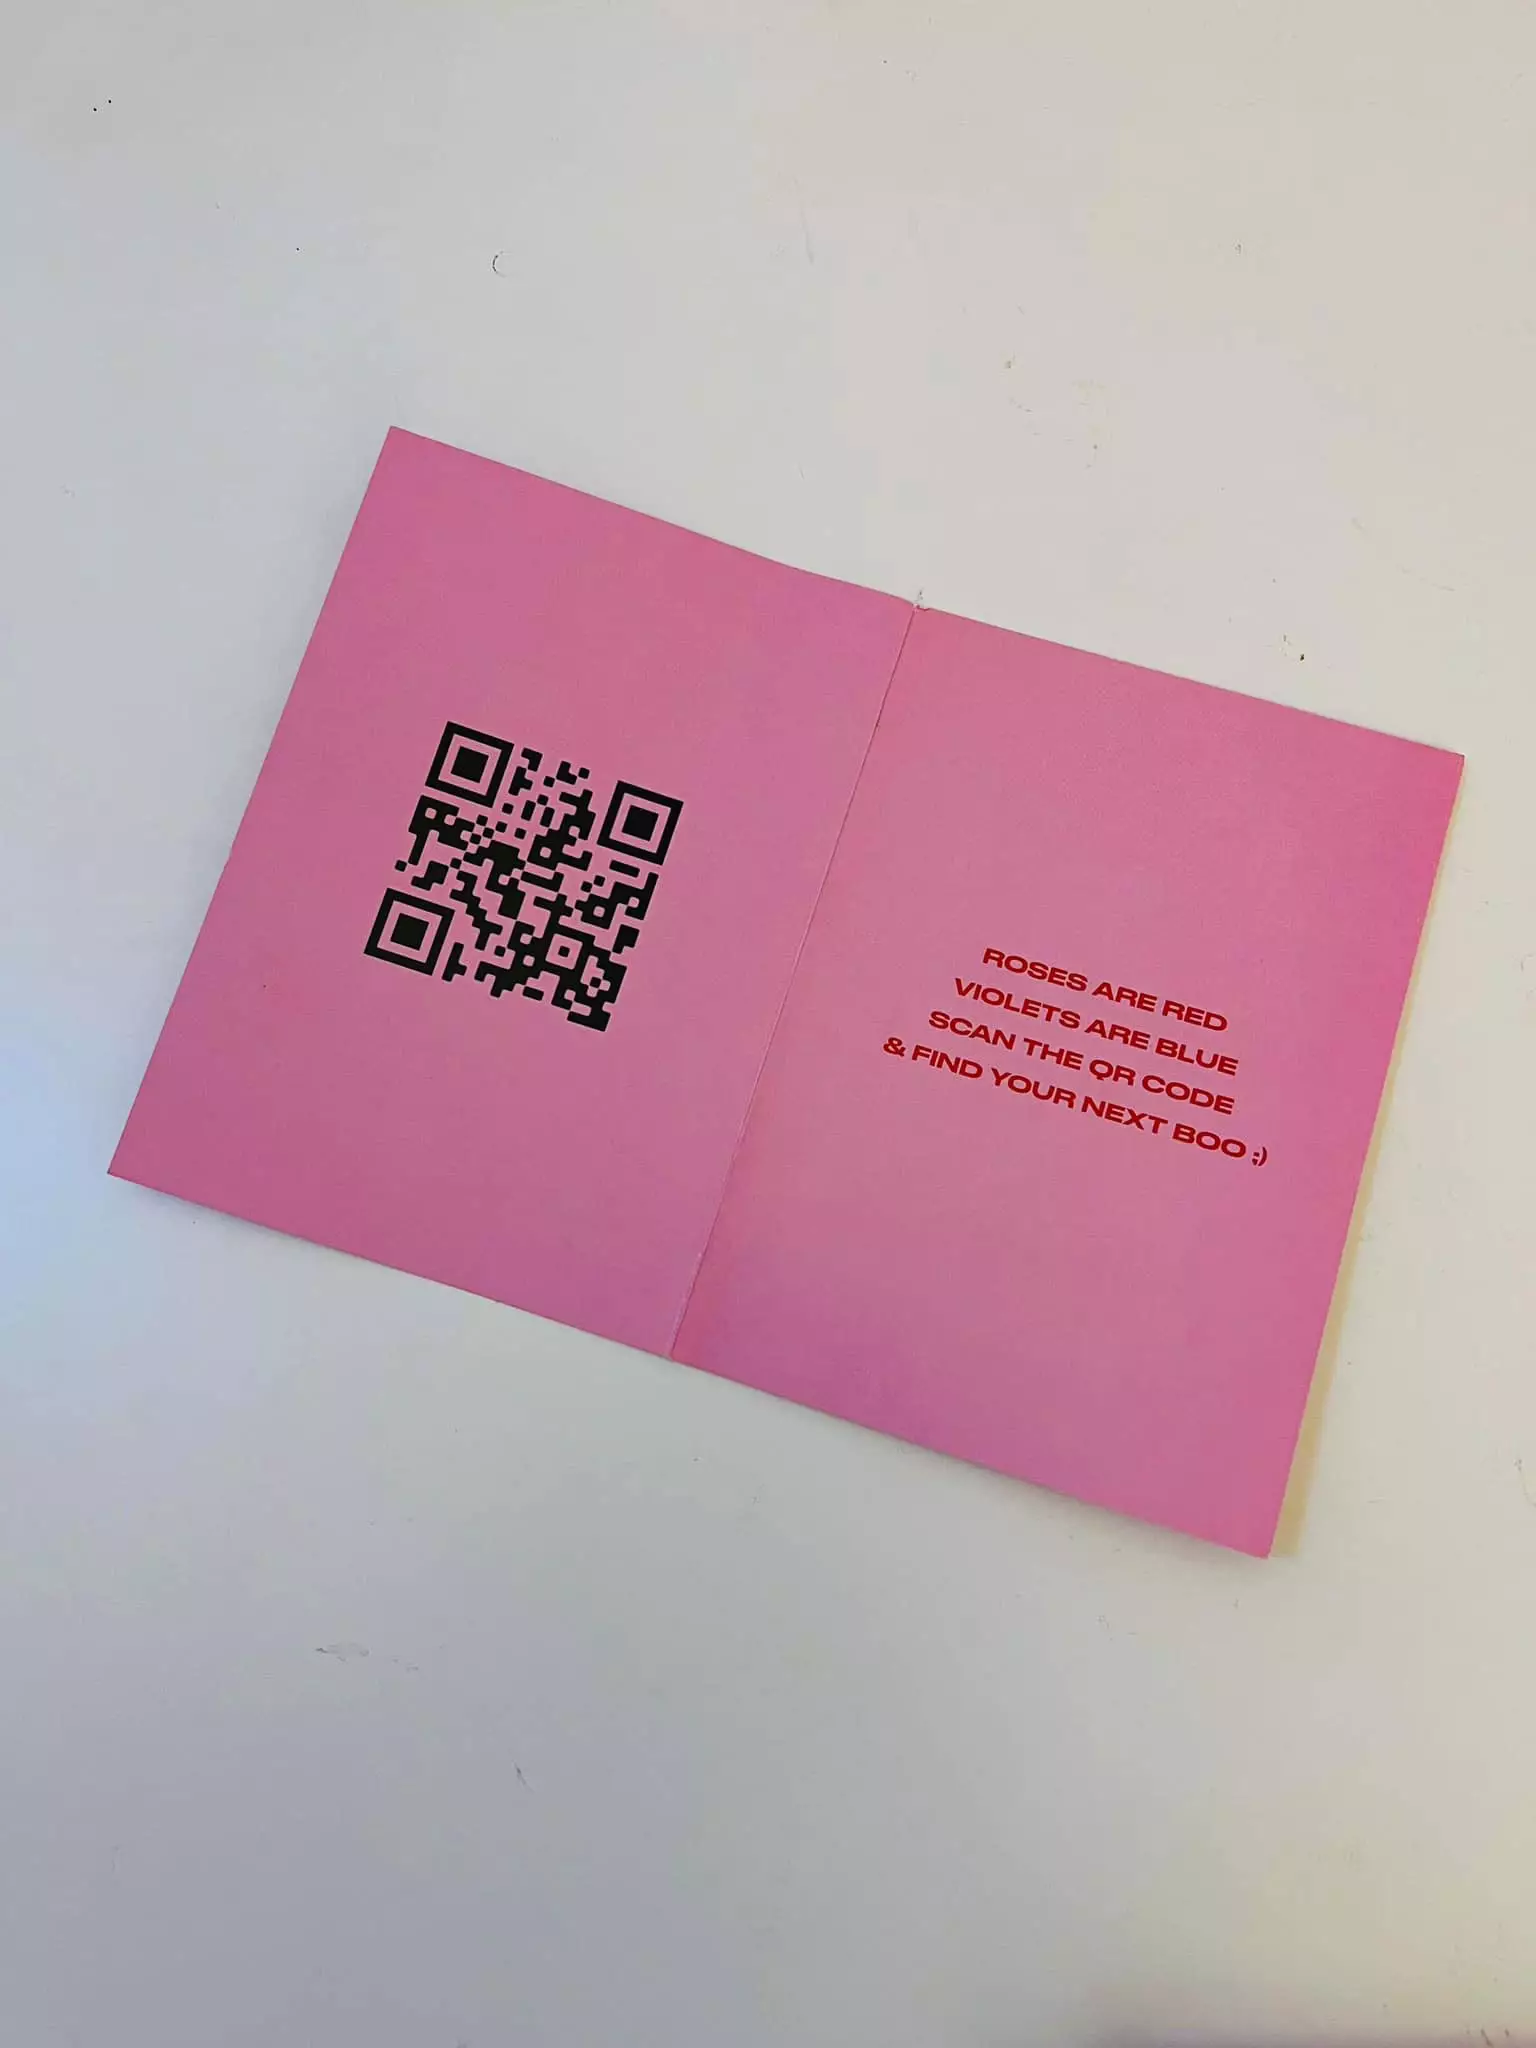 The inside featured a QR code she thought was his number (